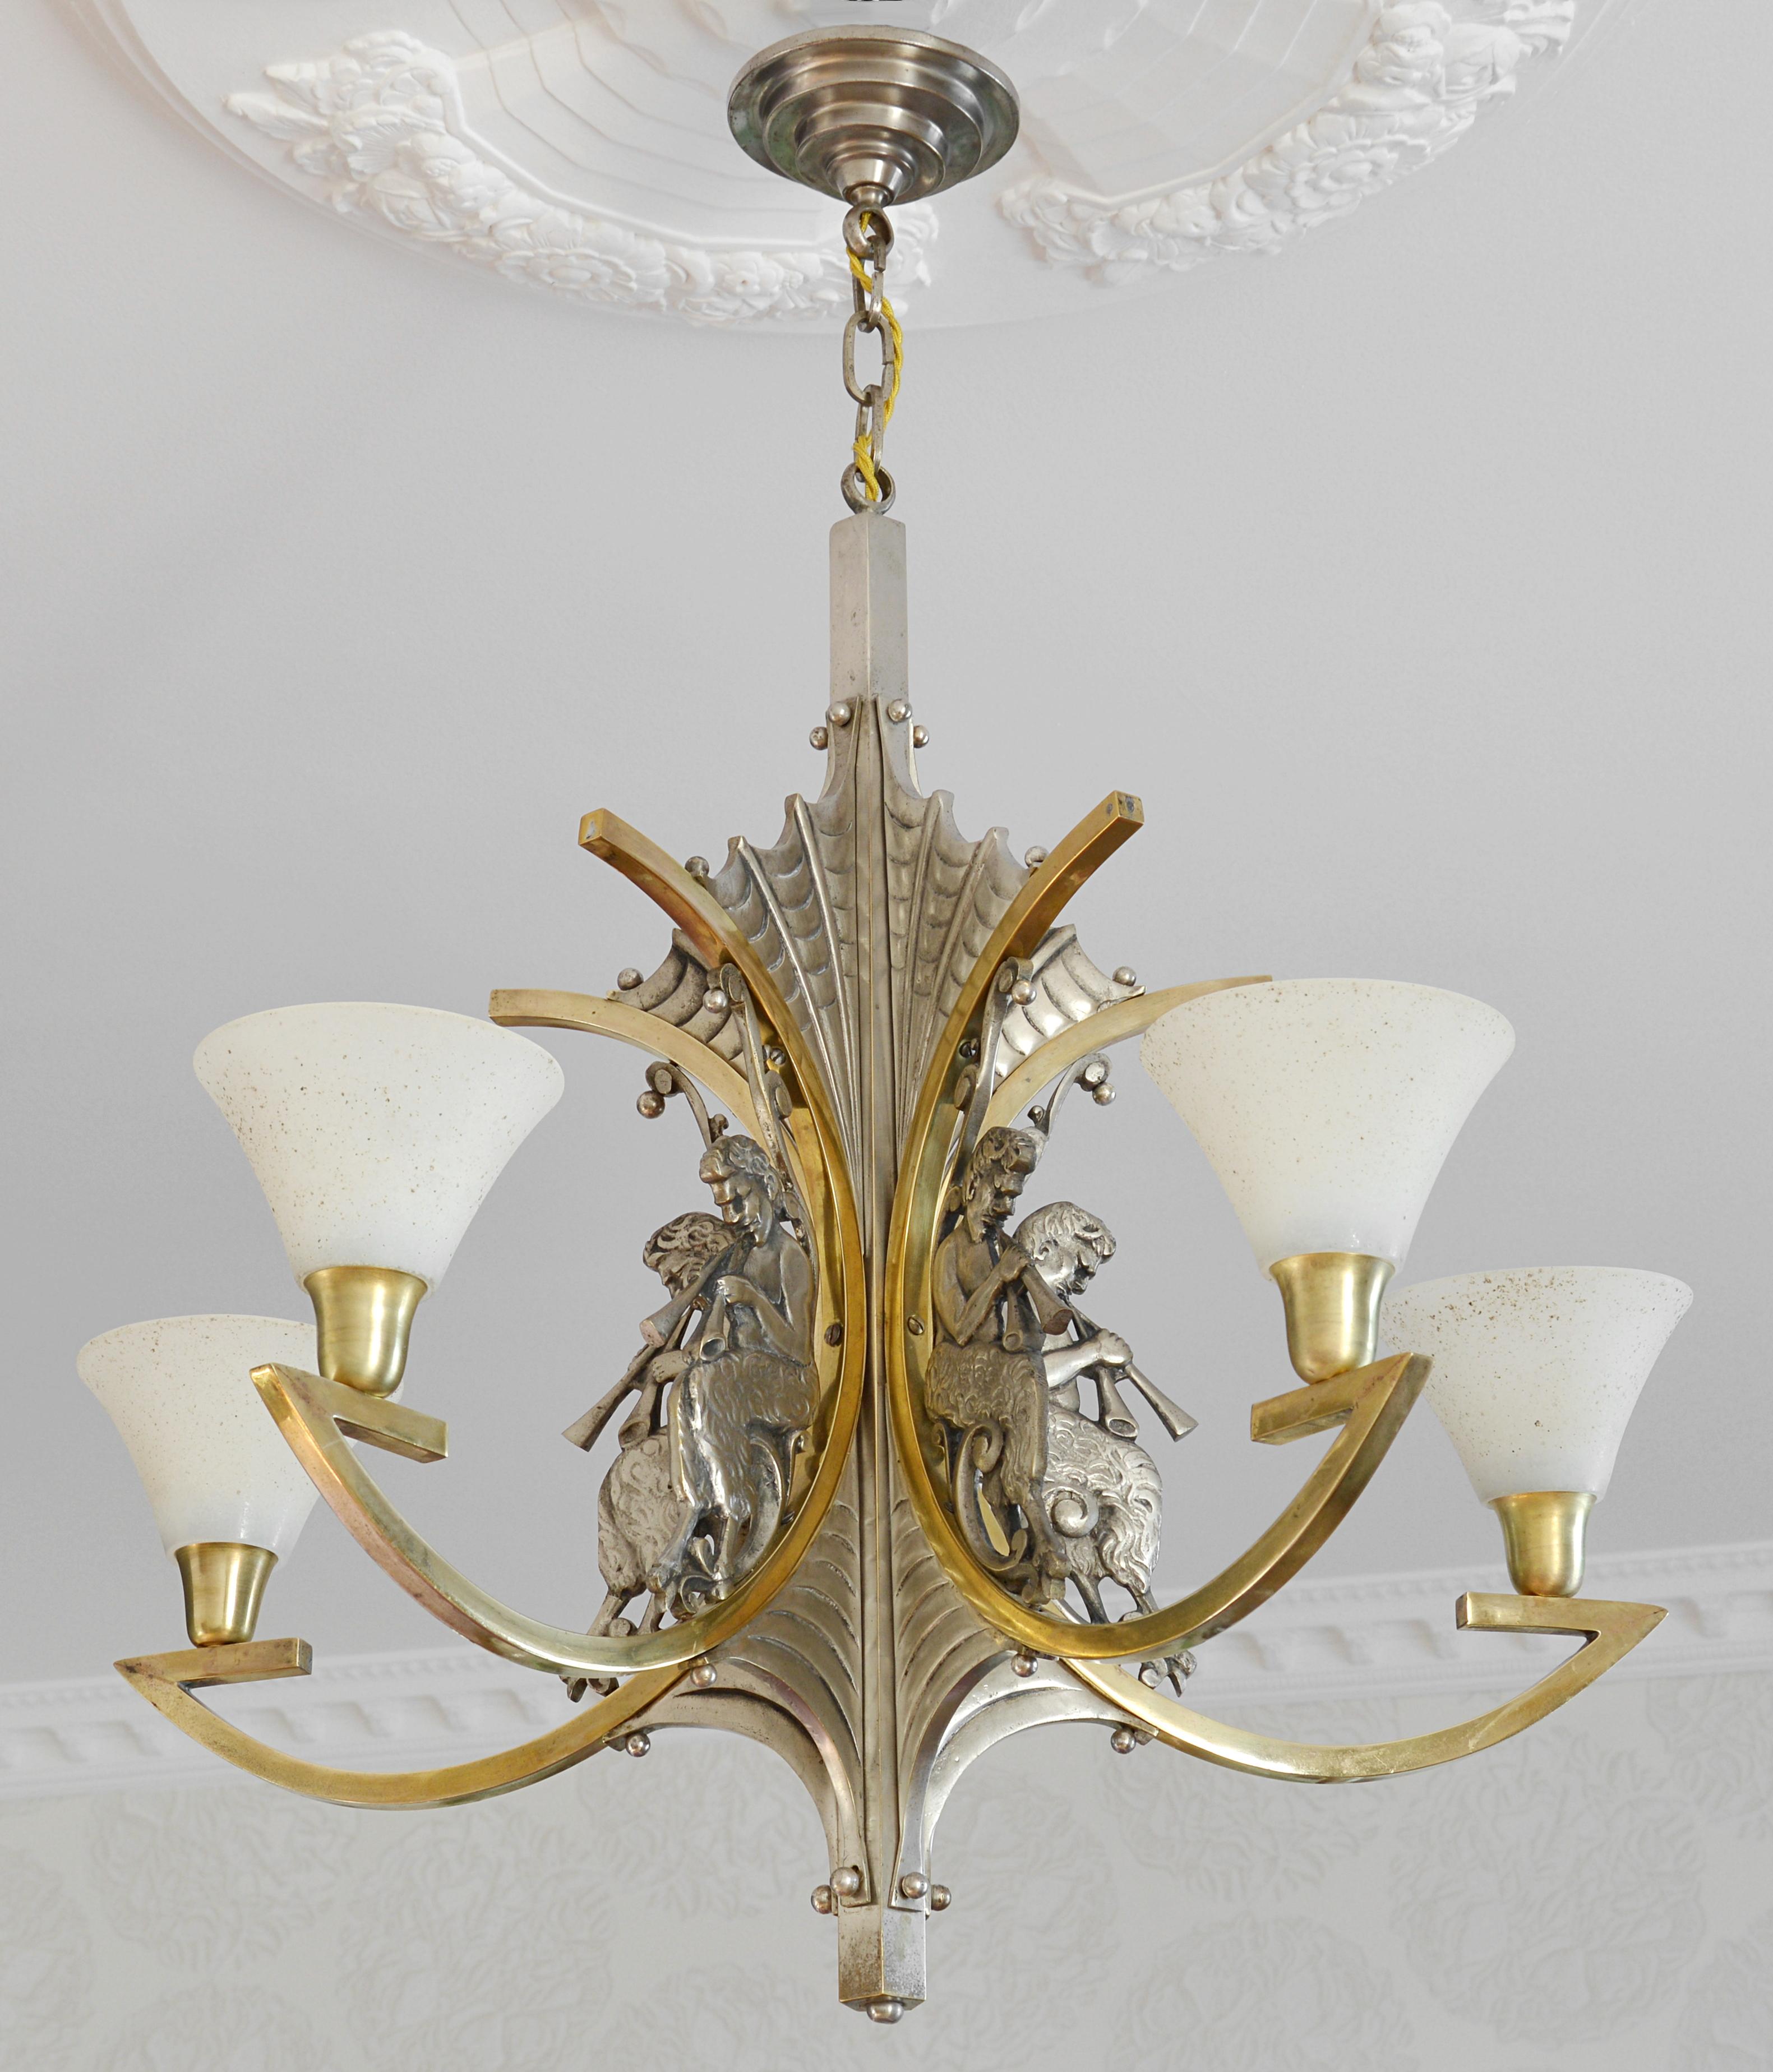 French Art Deco bronze chandelier, Paris, France, circa 1930. Gods pan. Solid silver plated bronze fixture showing five gods pan. Five granite-like glass shades. Very good condition. Traces of age on the metal fixture (see photos). Delivered wired